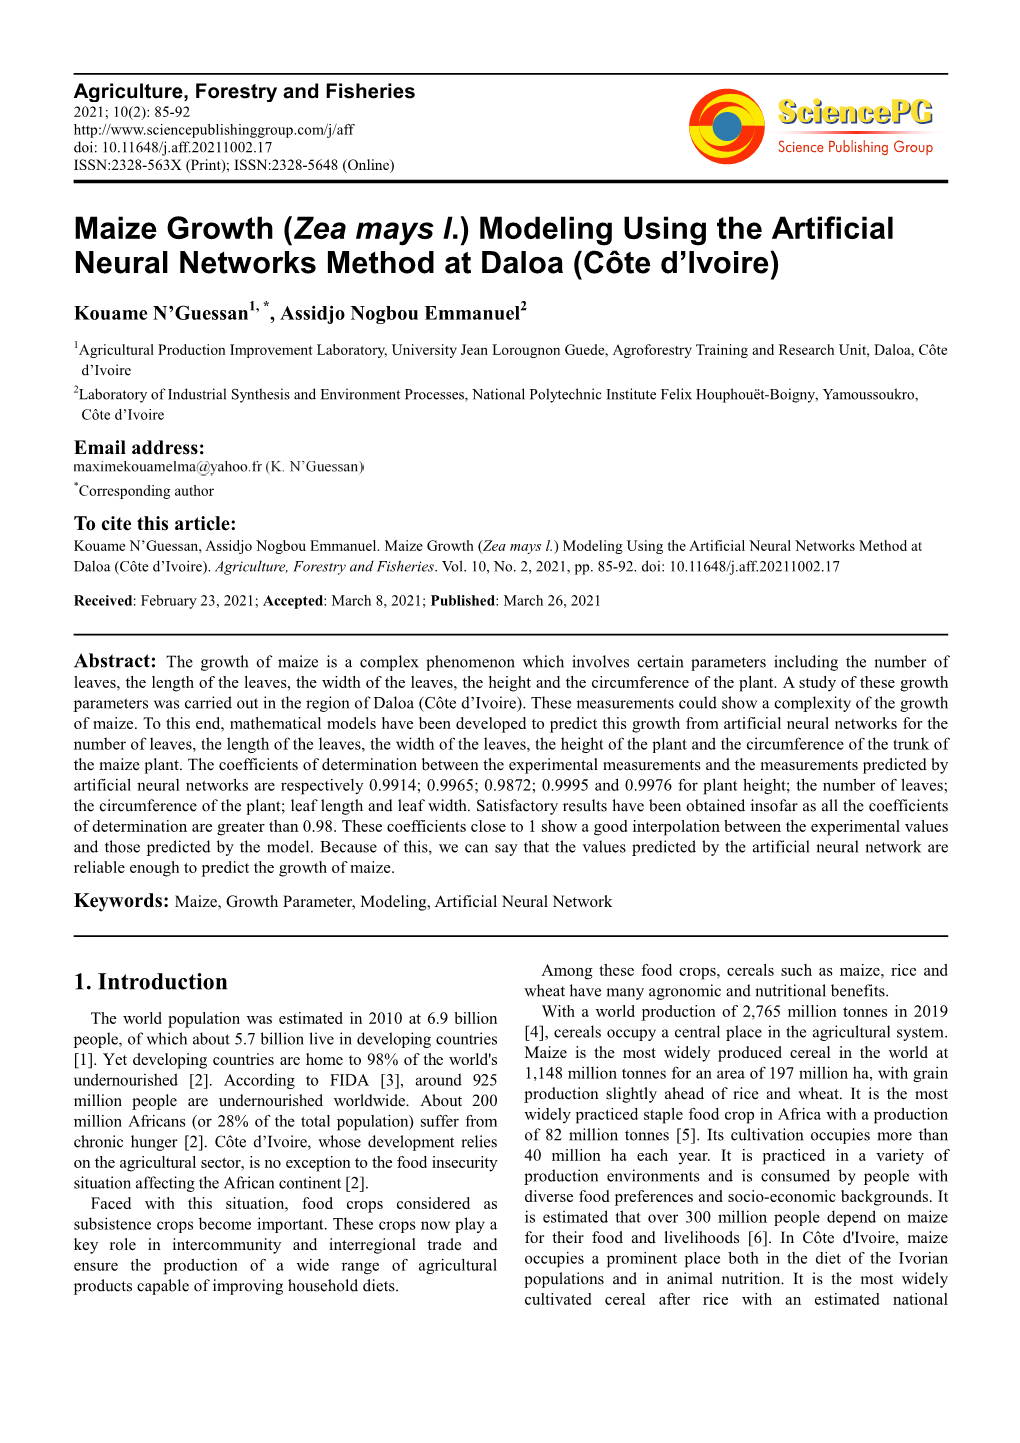 Maize Growth (Zea Mays L.) Modeling Using the Artificial Neural Networks Method at Daloa (Côte D’Ivoire)